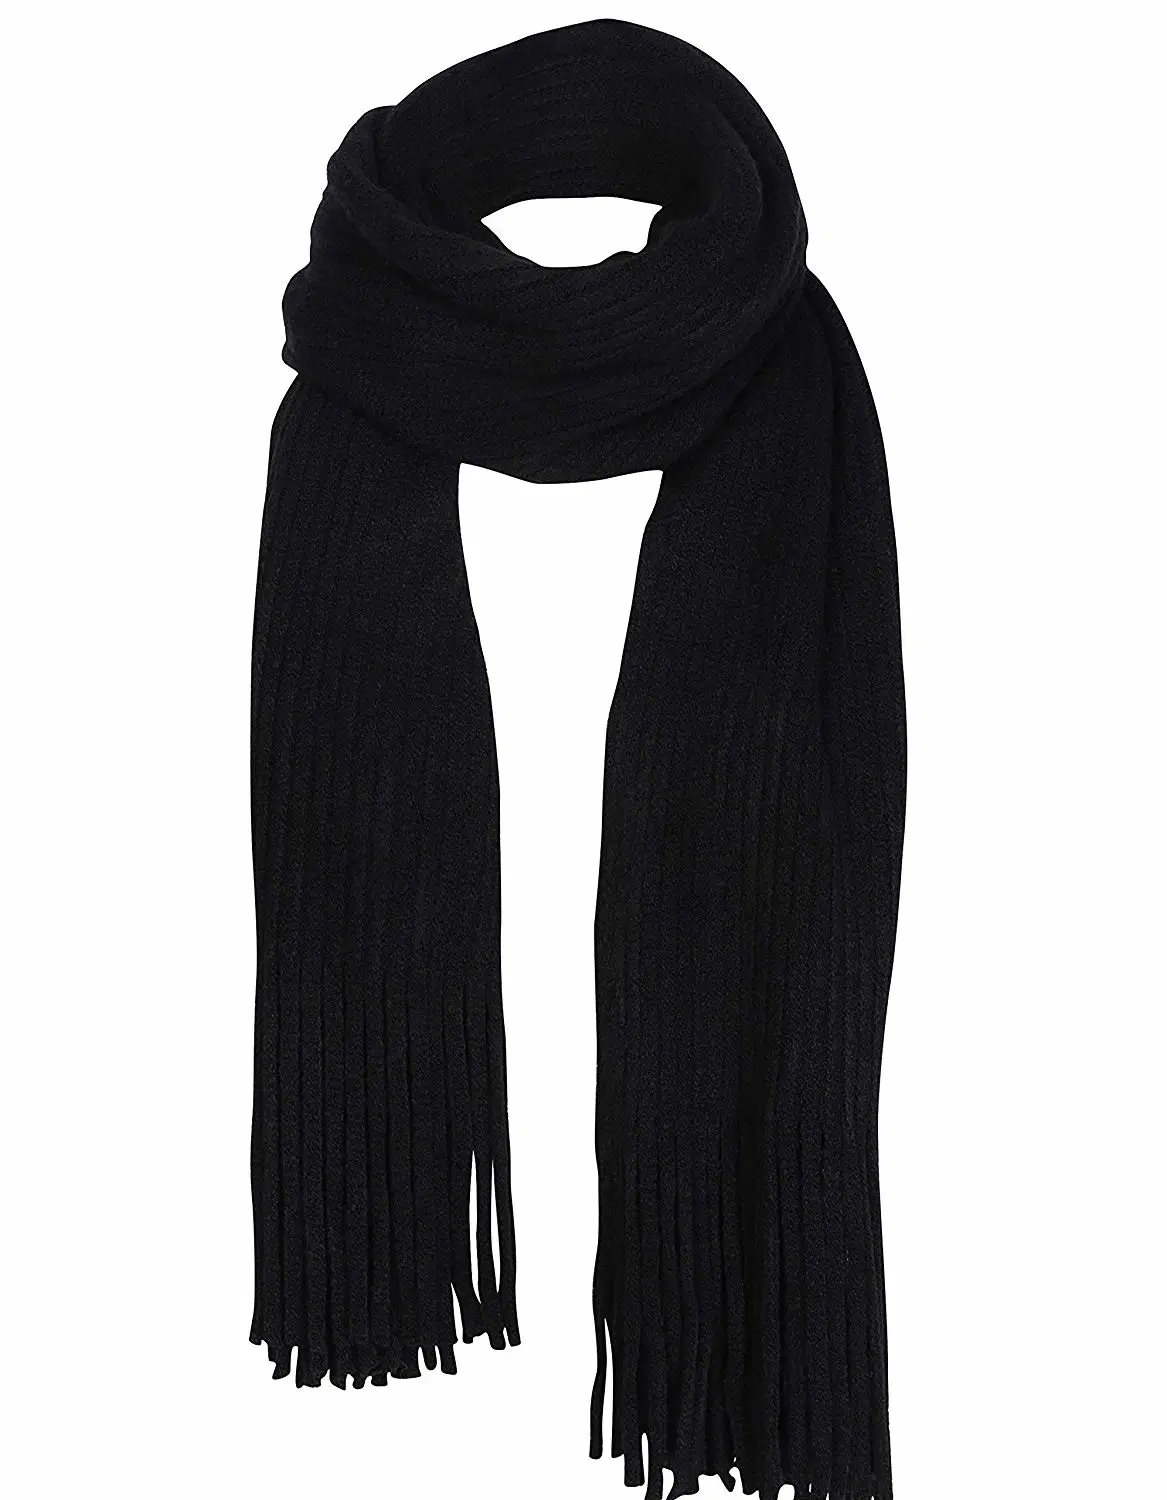 100% Acrylic Classical Winter Autumn Outdoor Protection Thick Cable Chunky Fashion Women Knit Scarf